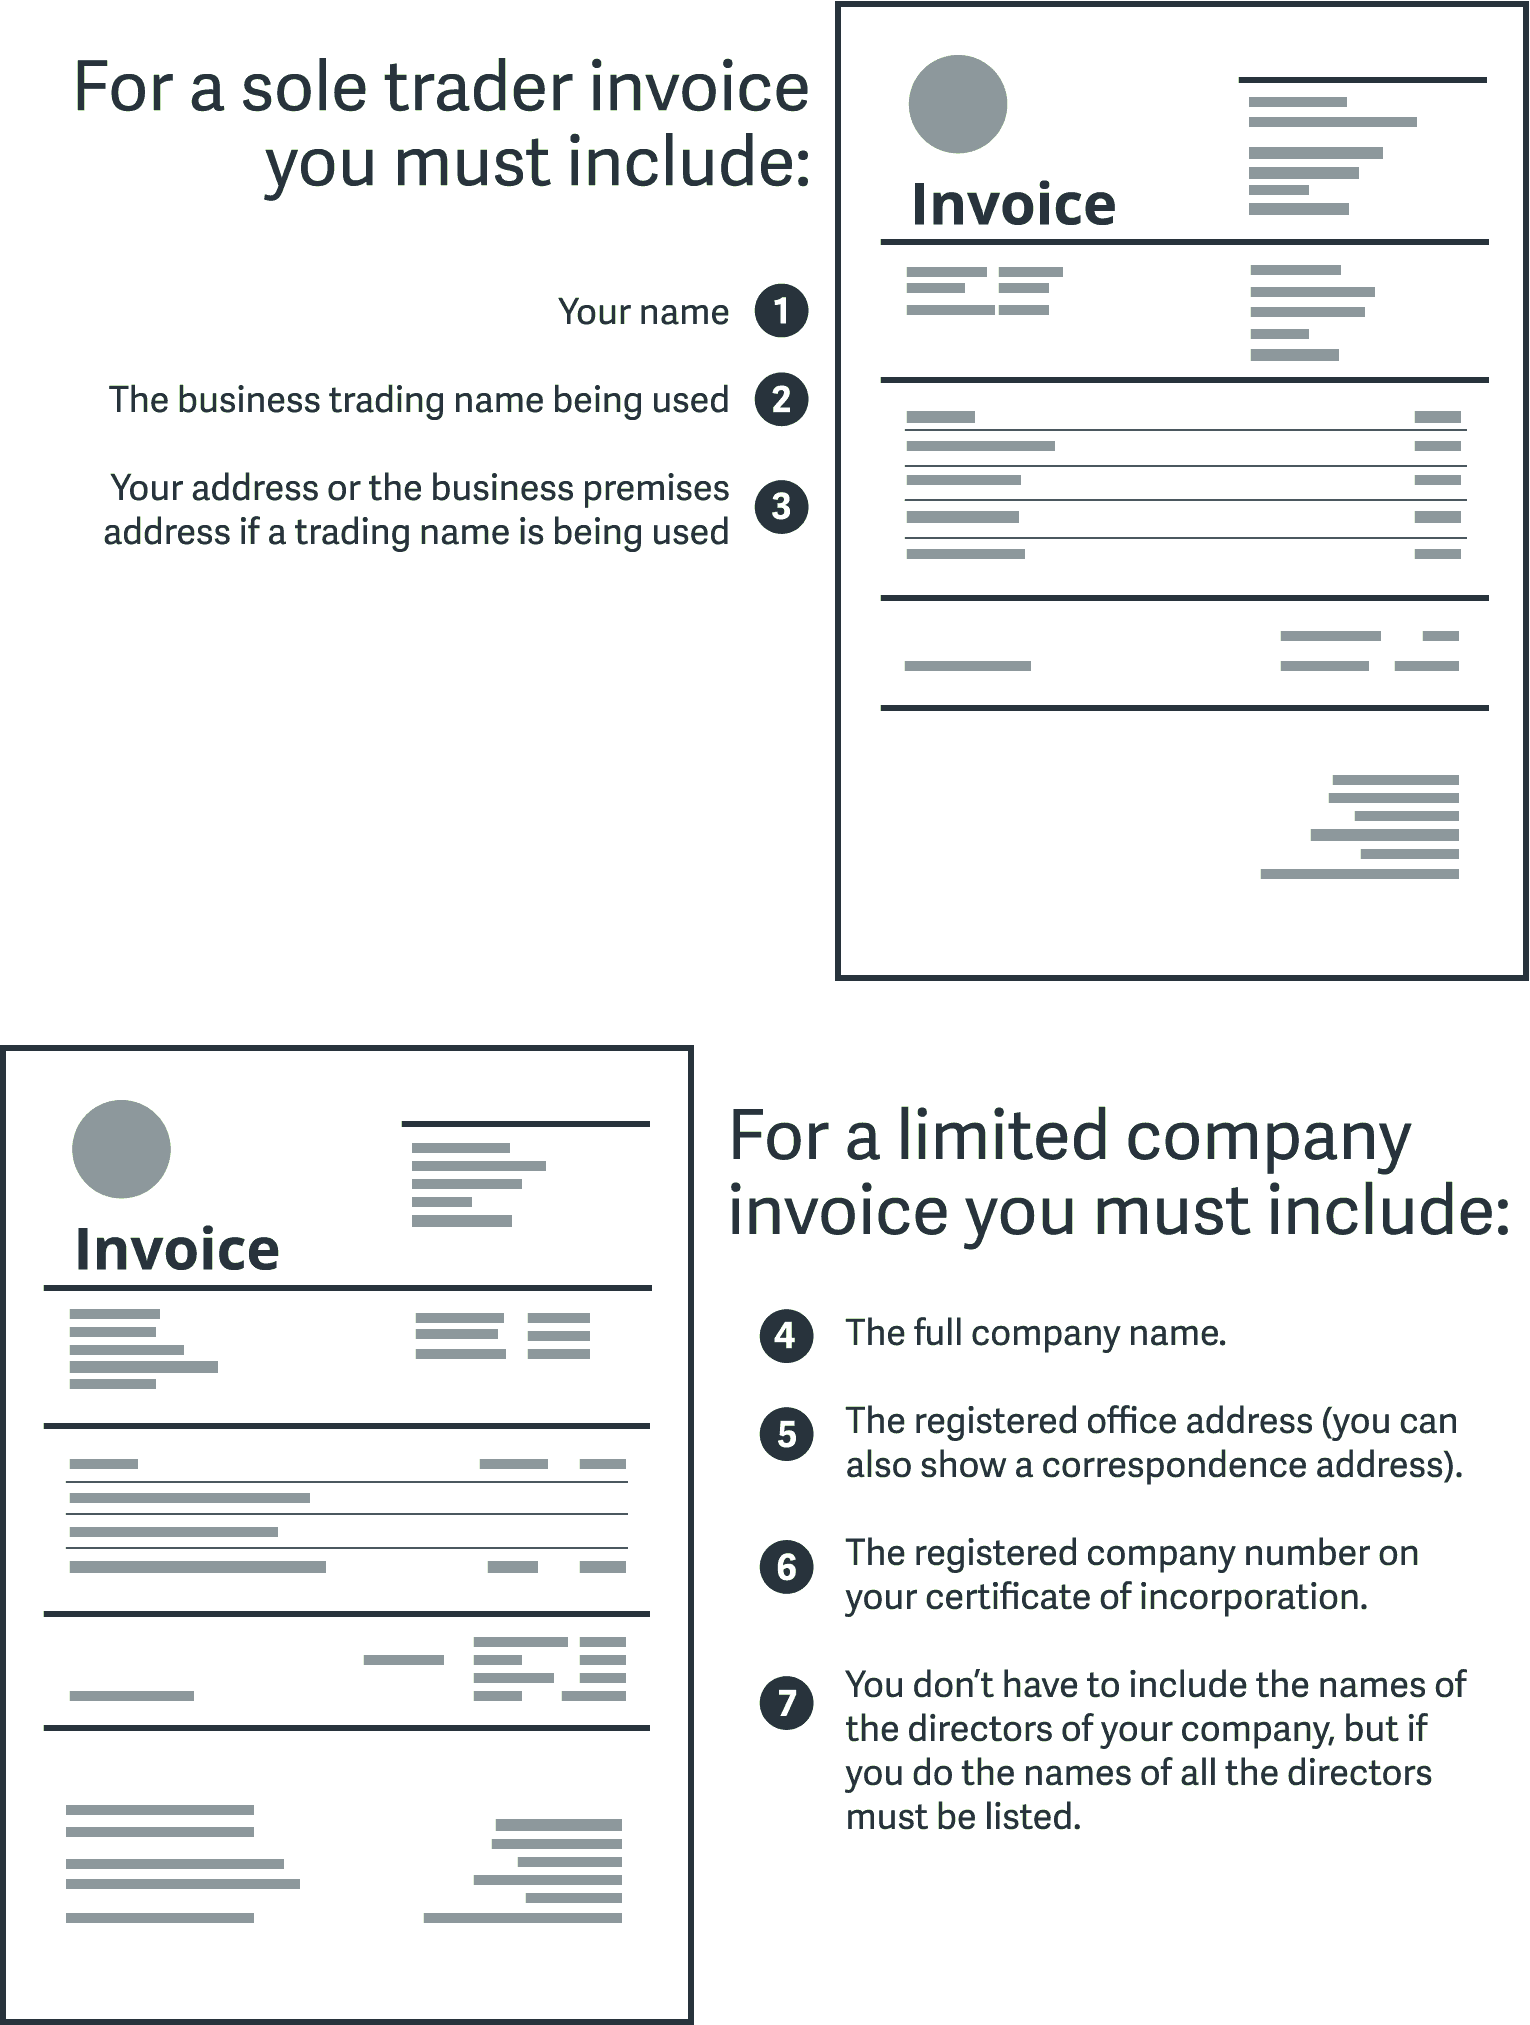 Invoice Cheat Sheet What You Need To Include On Your Invoices Sage Advice United Kingdom